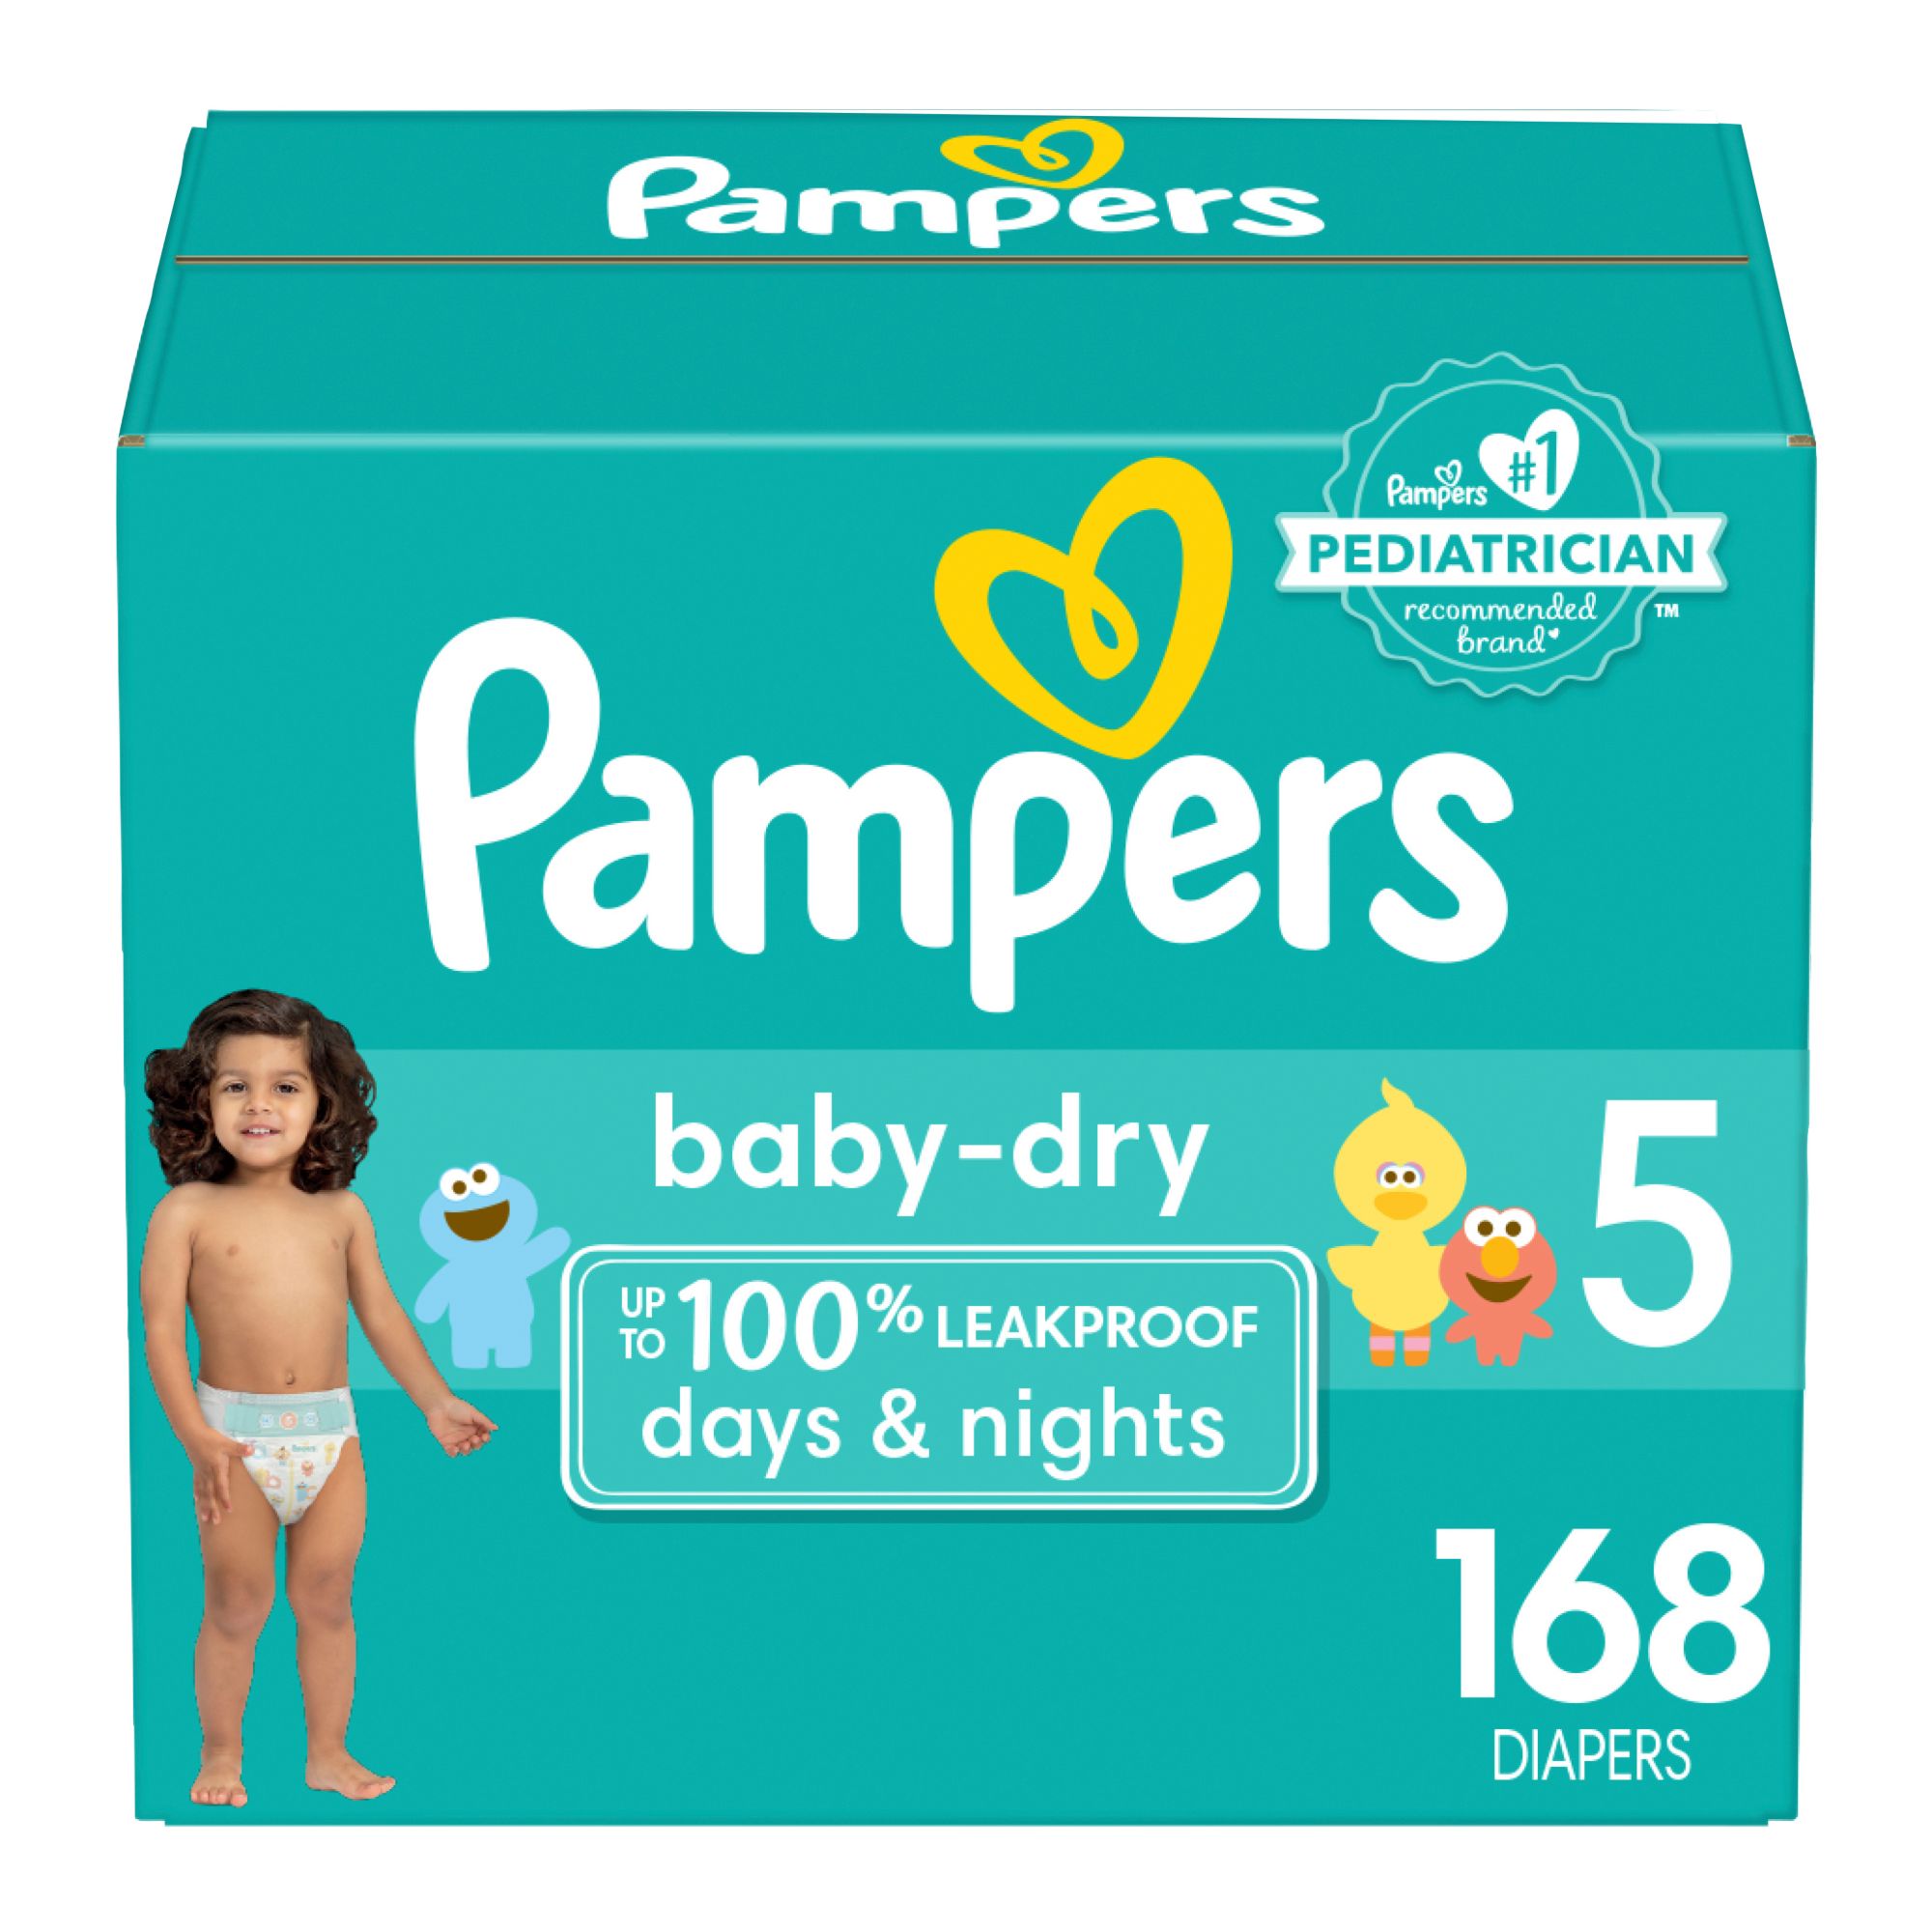 Pampers Baby Dry Diapers (Select Size)